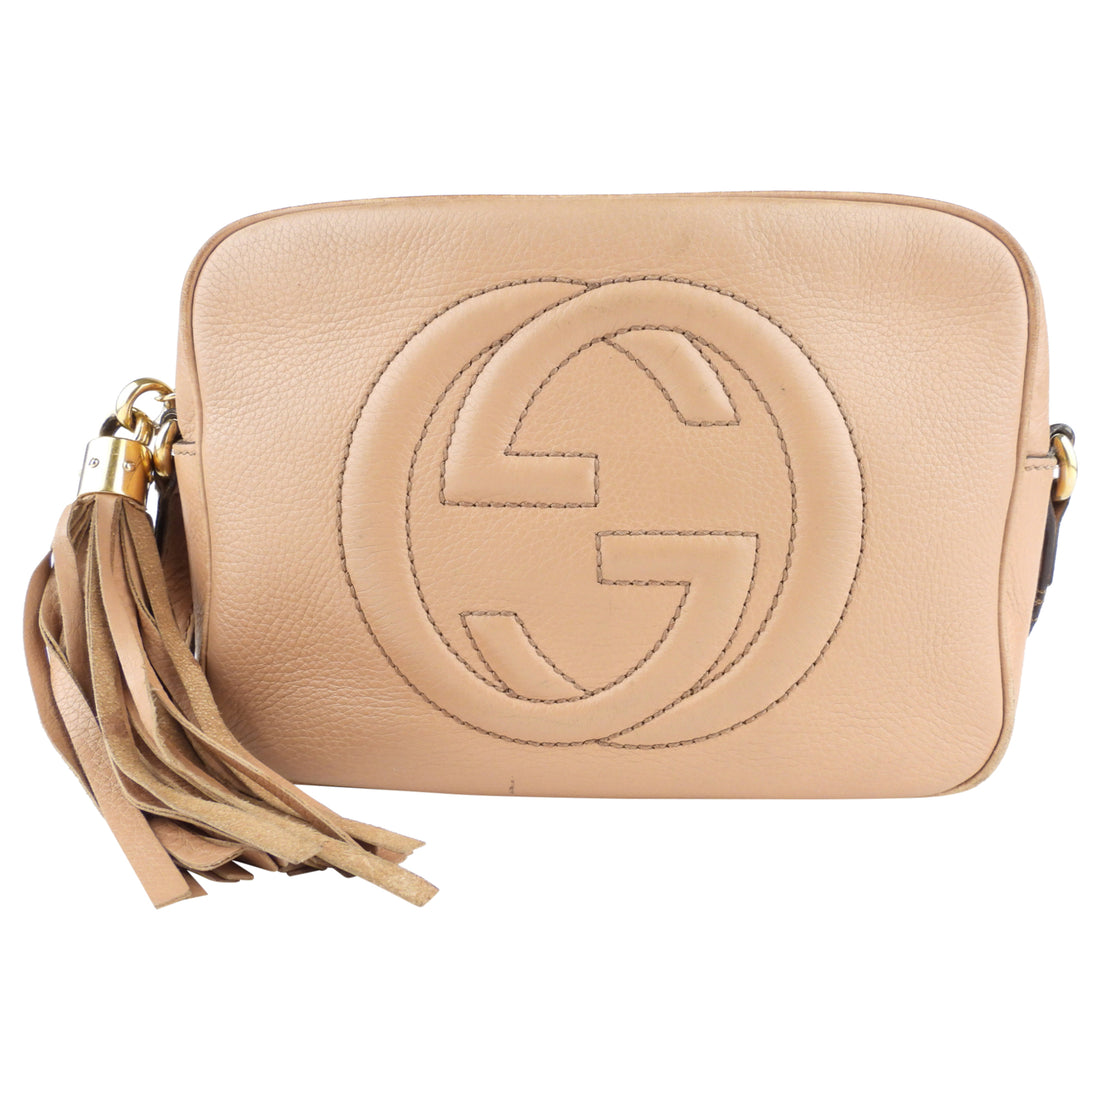 Gucci Nude Beige Leather Small Soho Crossbody Bag – I MISS YOU VINTAGE